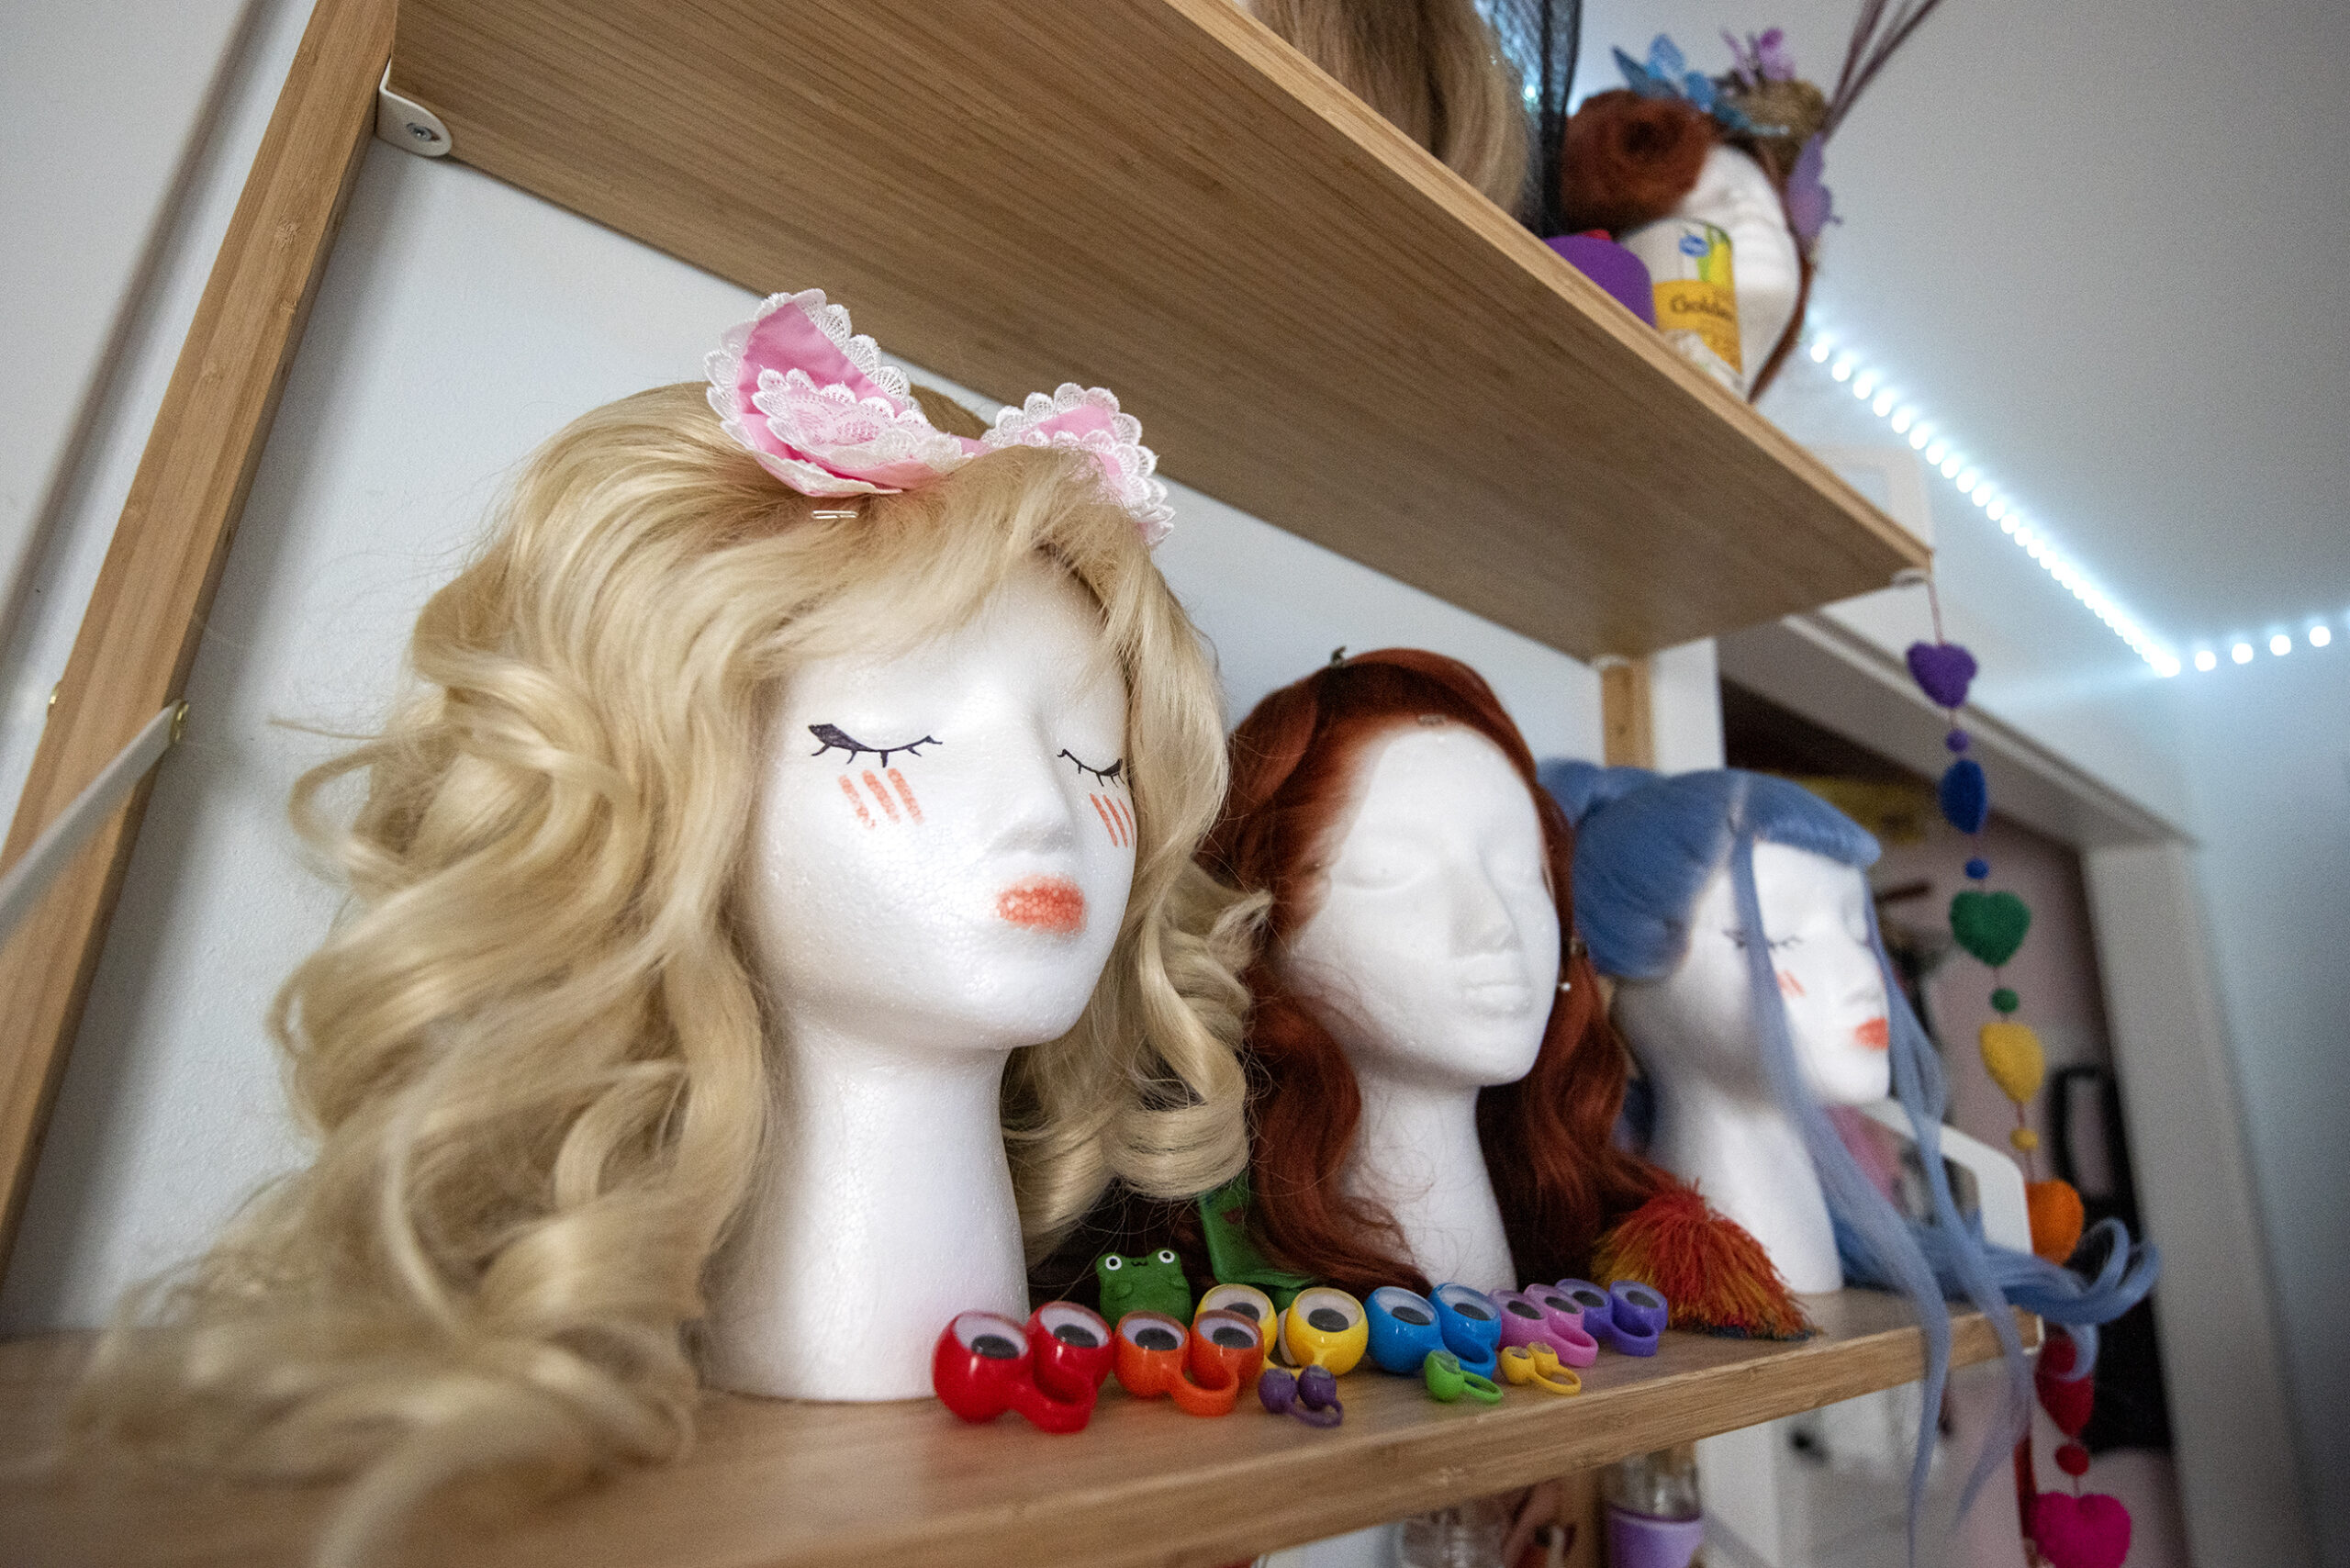 Wigs are on mannequin heads on a shelf.